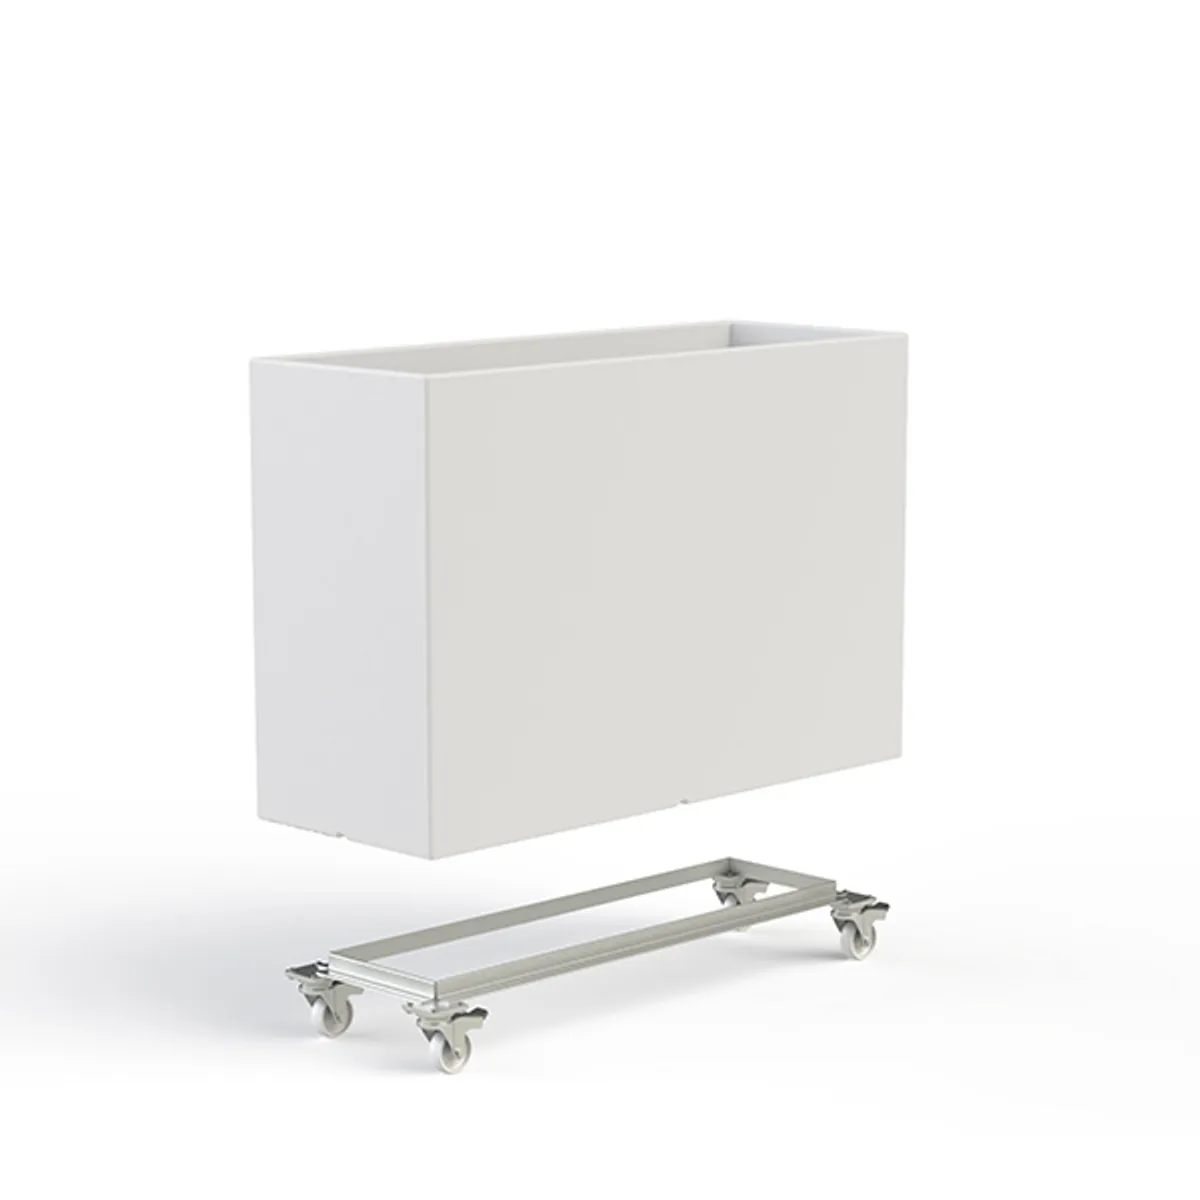 Kado Planter Trolley White Inside Out Contracts